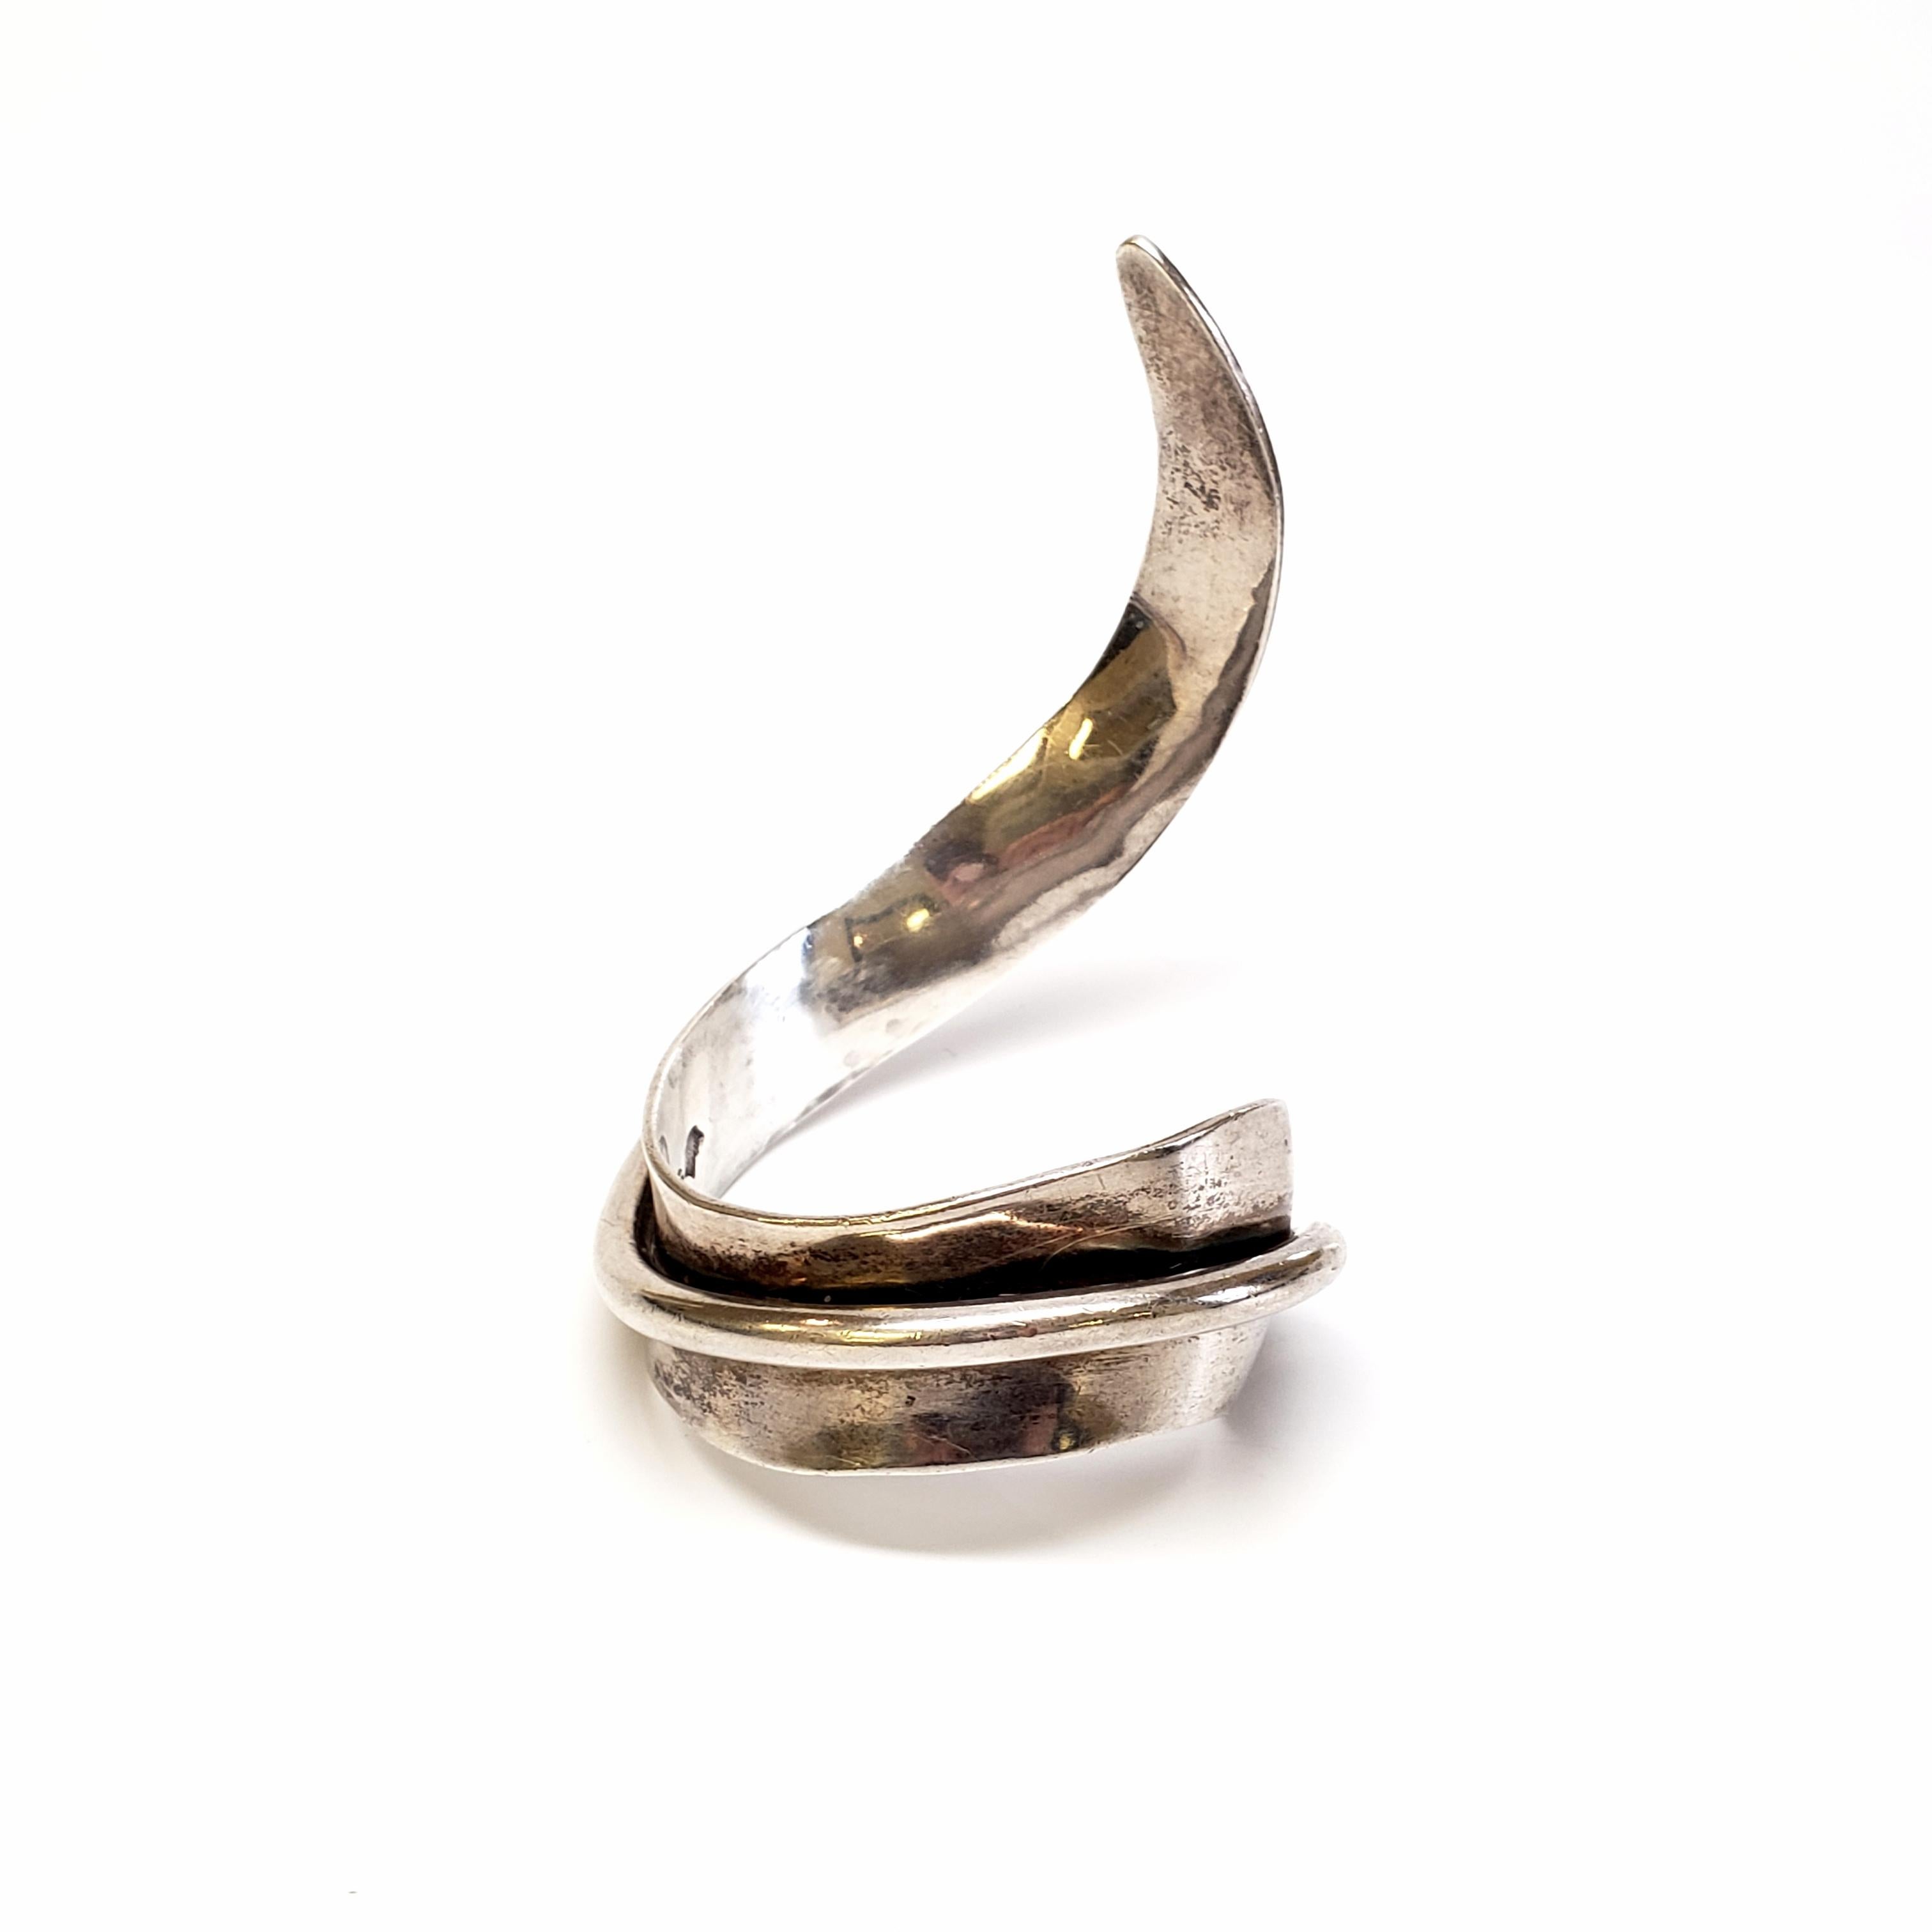 Vintage Taxco, Mexico 970 Silver twisted arm cuff.

Beautiful silver bracelet by renowned master silversmith, Antonio Pineda. The modernist design features a twisted design cuff that can be worn on the upper arm or wrist.

Measures 6 3/4